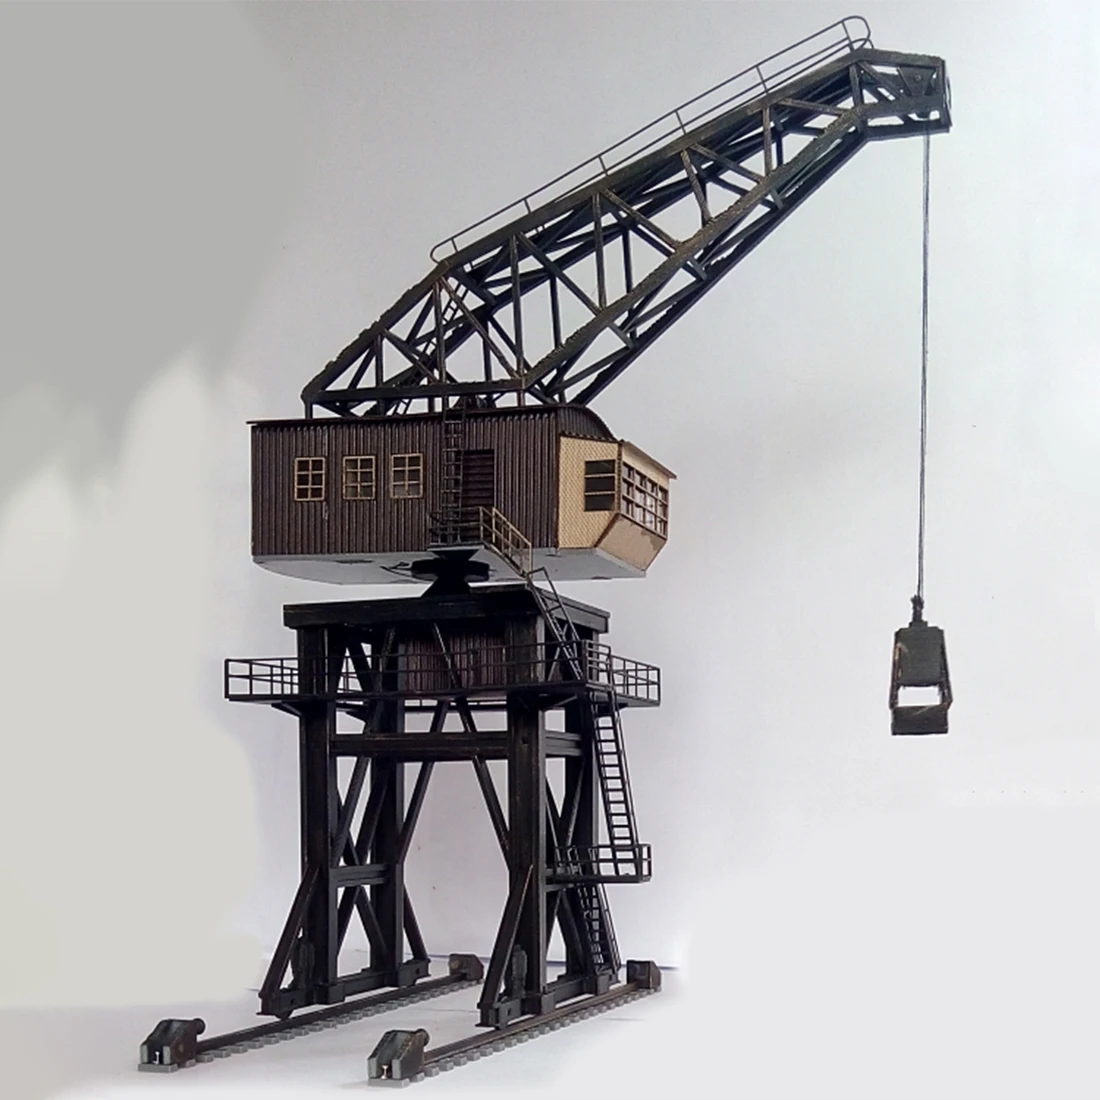 

NFSTRIKE 1:87 HO Scale Train Railway Scene Decoration Large-Scale Coal Crane Model For Sand Table Accessories DIY Architectural